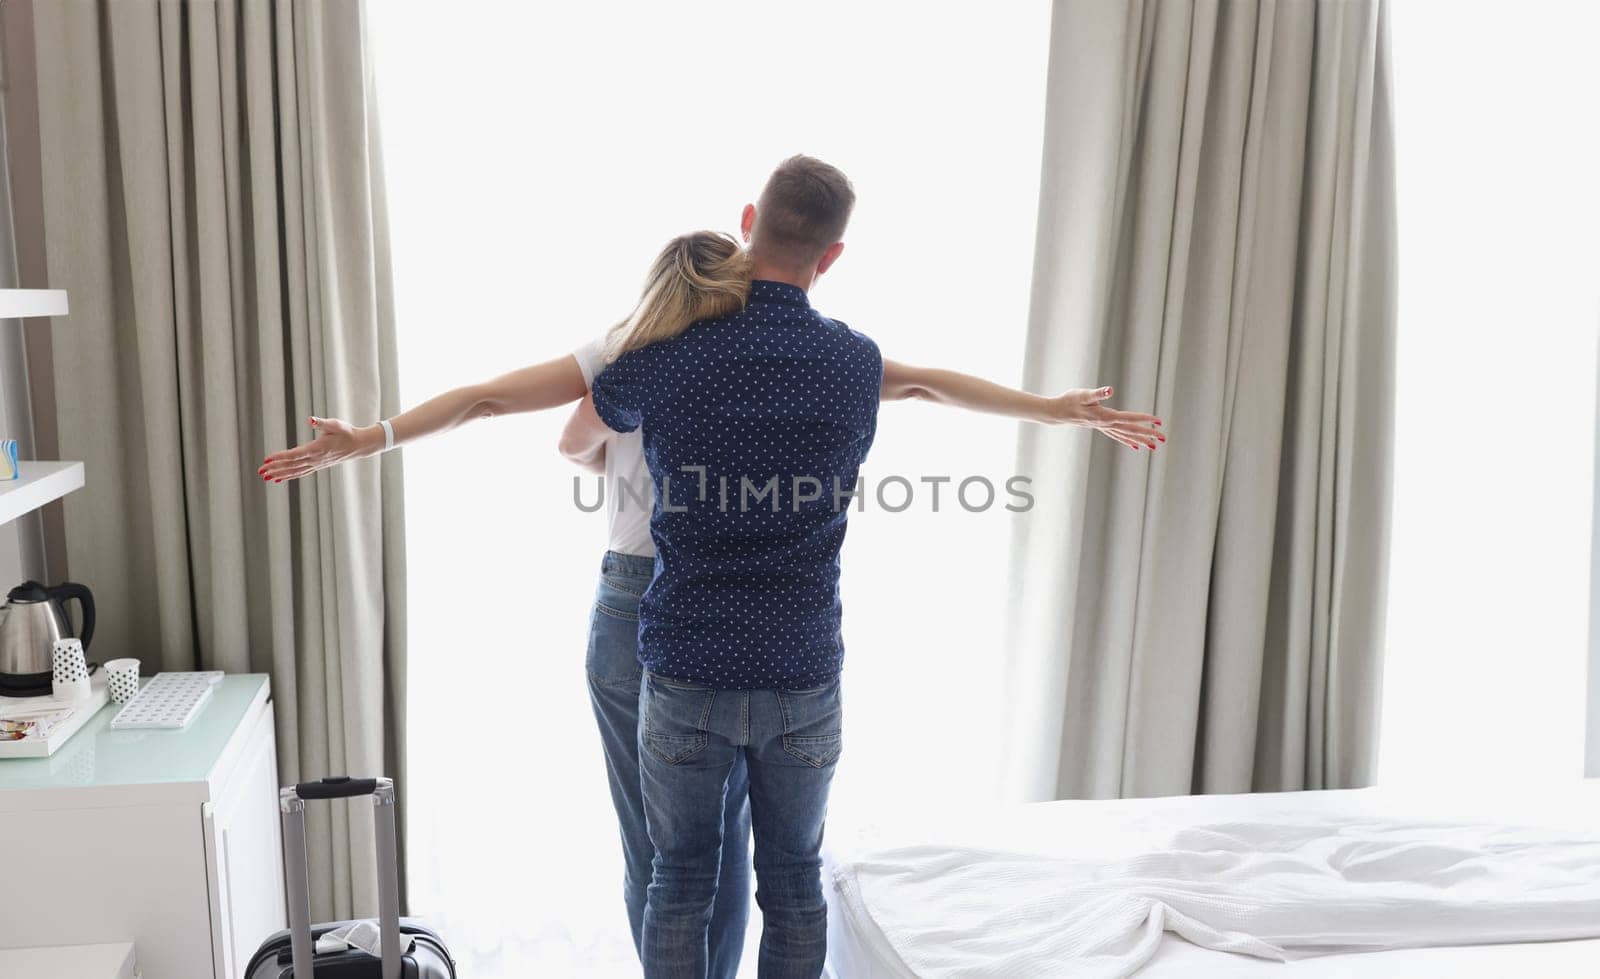 In a hotel at the window, a couple hugging, rear view by kuprevich